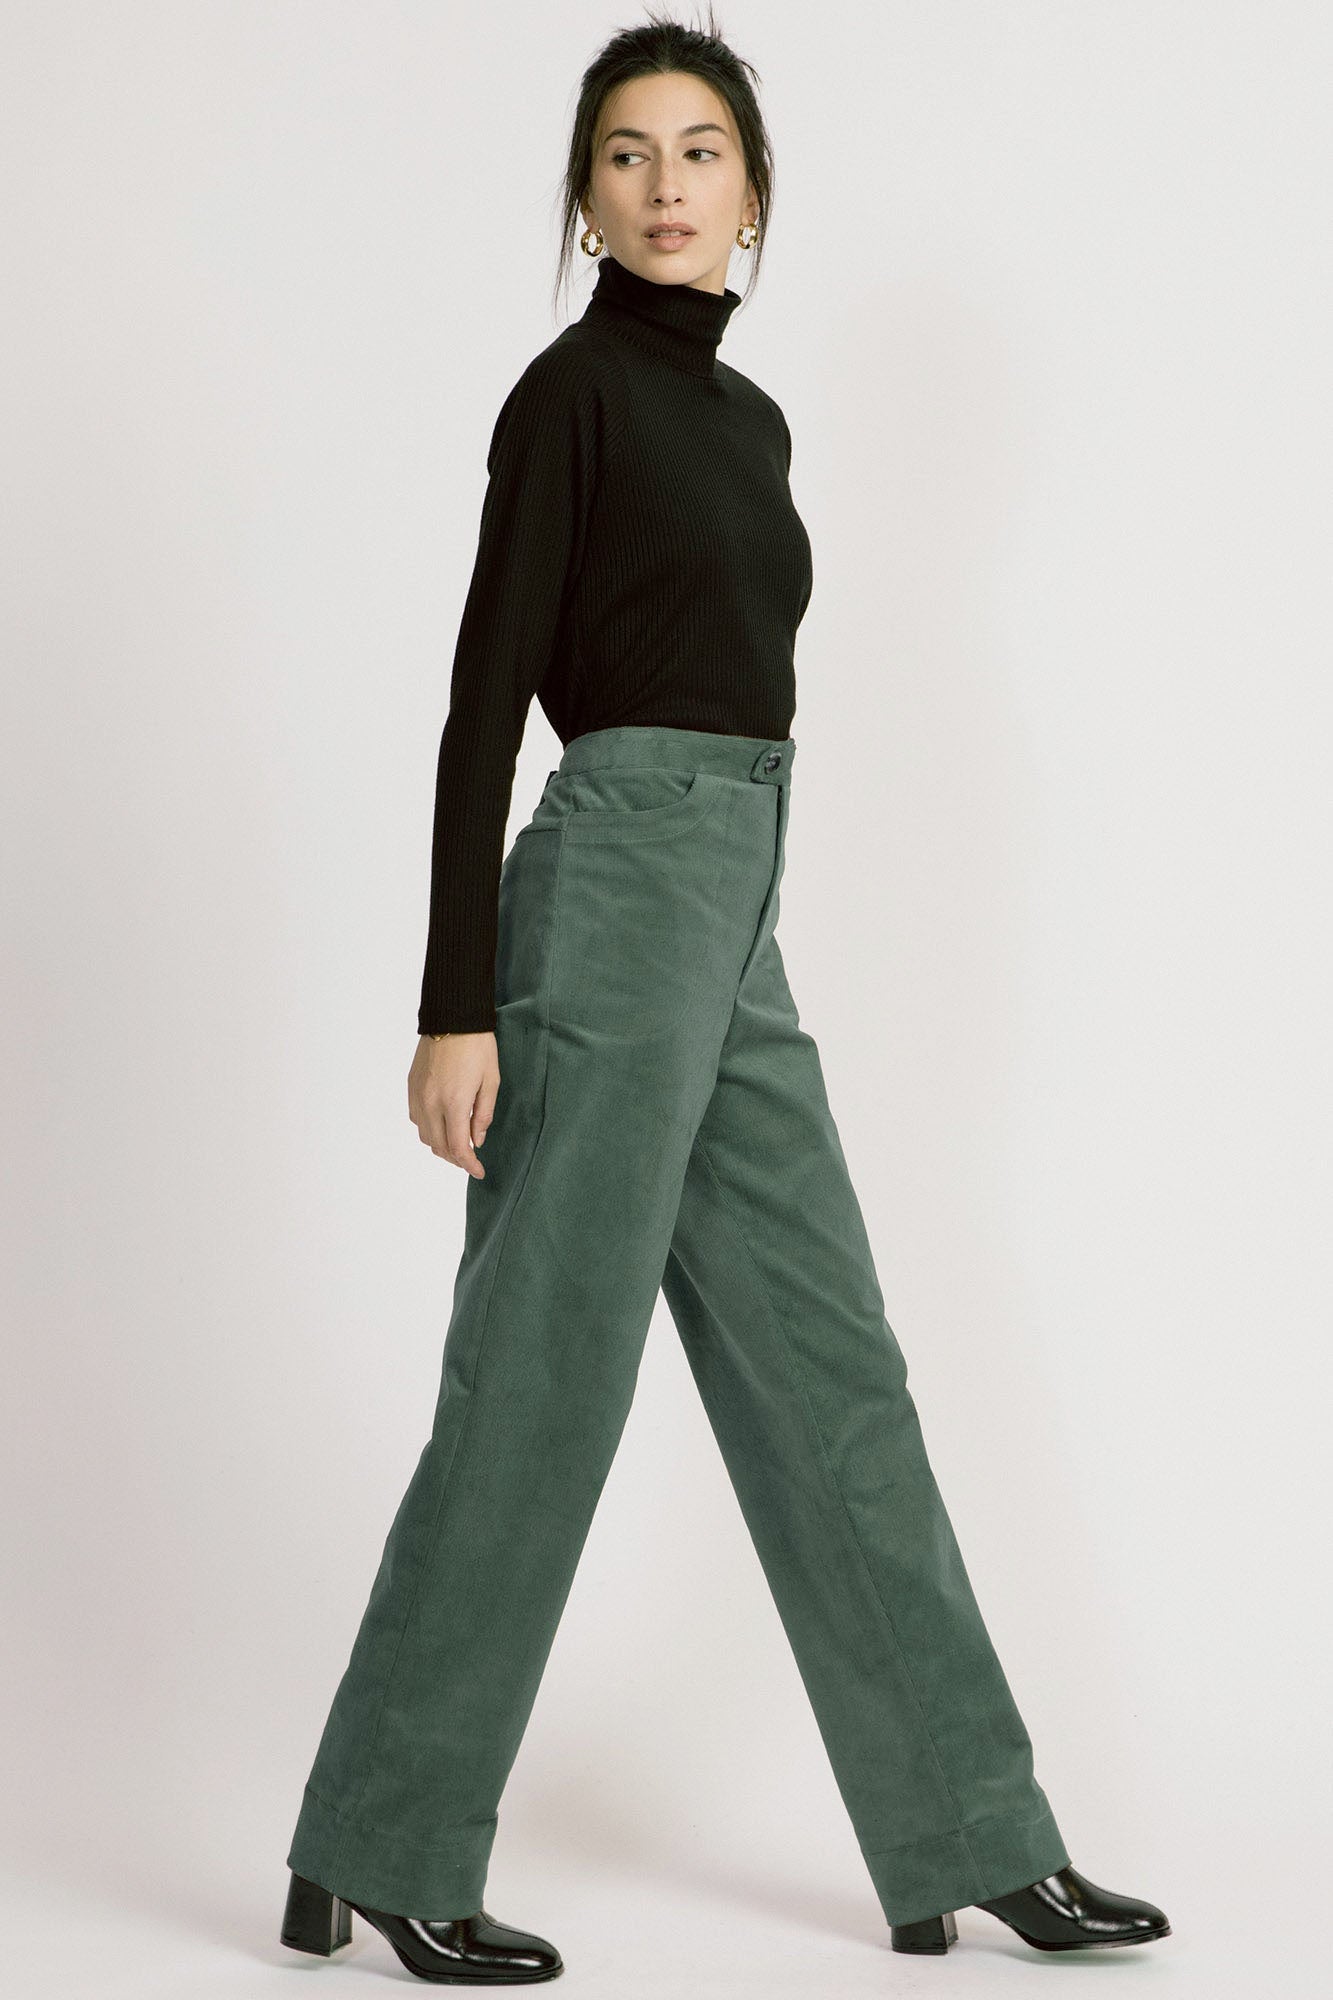 Lydia Pant by Allison Wonderland, Pine, side view, corduroy, high-waisted, fly front, front pockets, barrel leg with deep hem, sizes 2-12, made in Vancouver